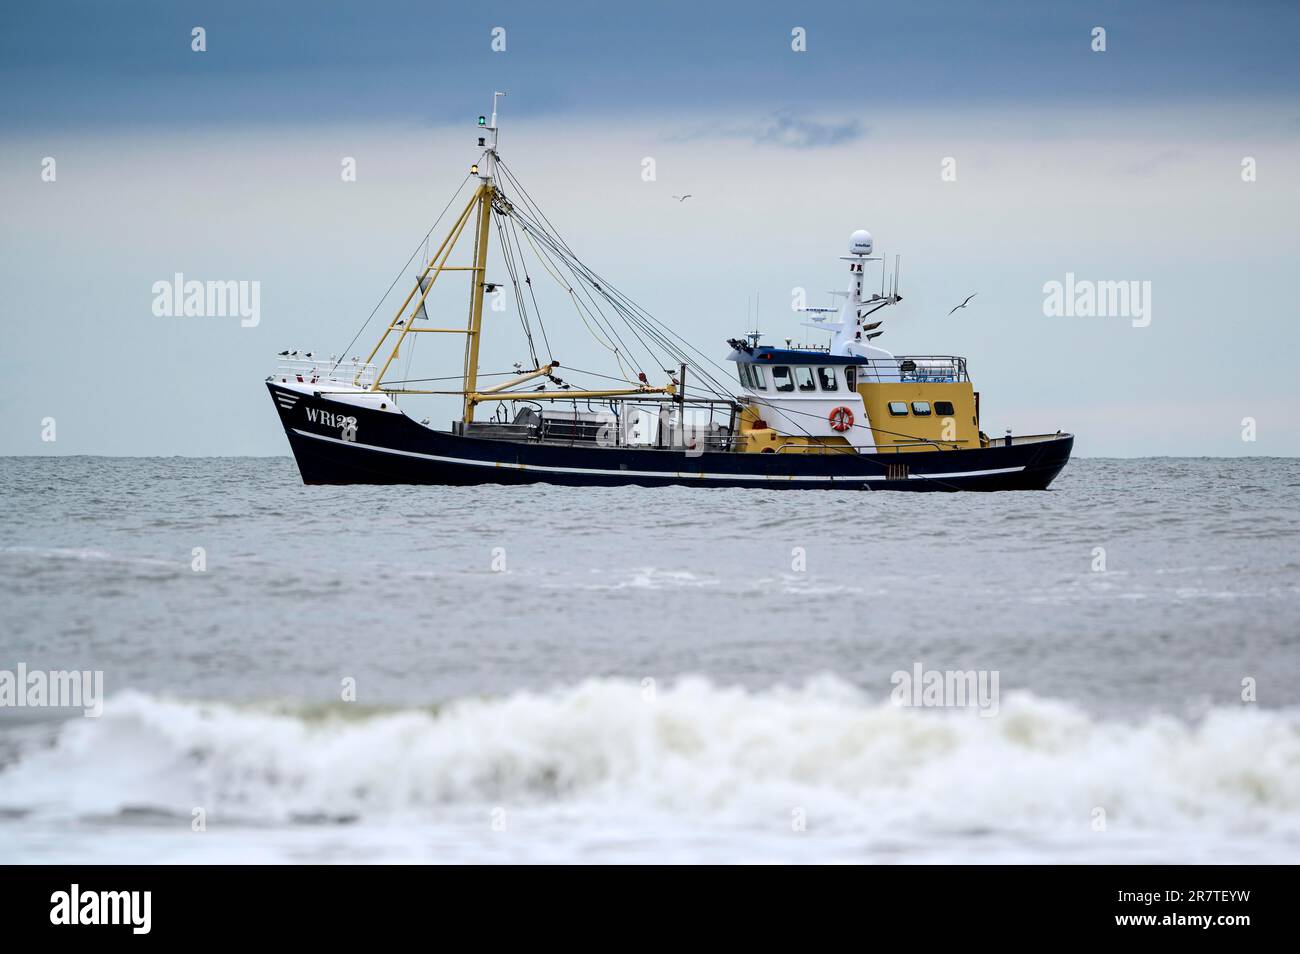 Shrimper, crabber near beach, with surf, Texel Island, North Sea, North Holland, Netherlands Stock Photo